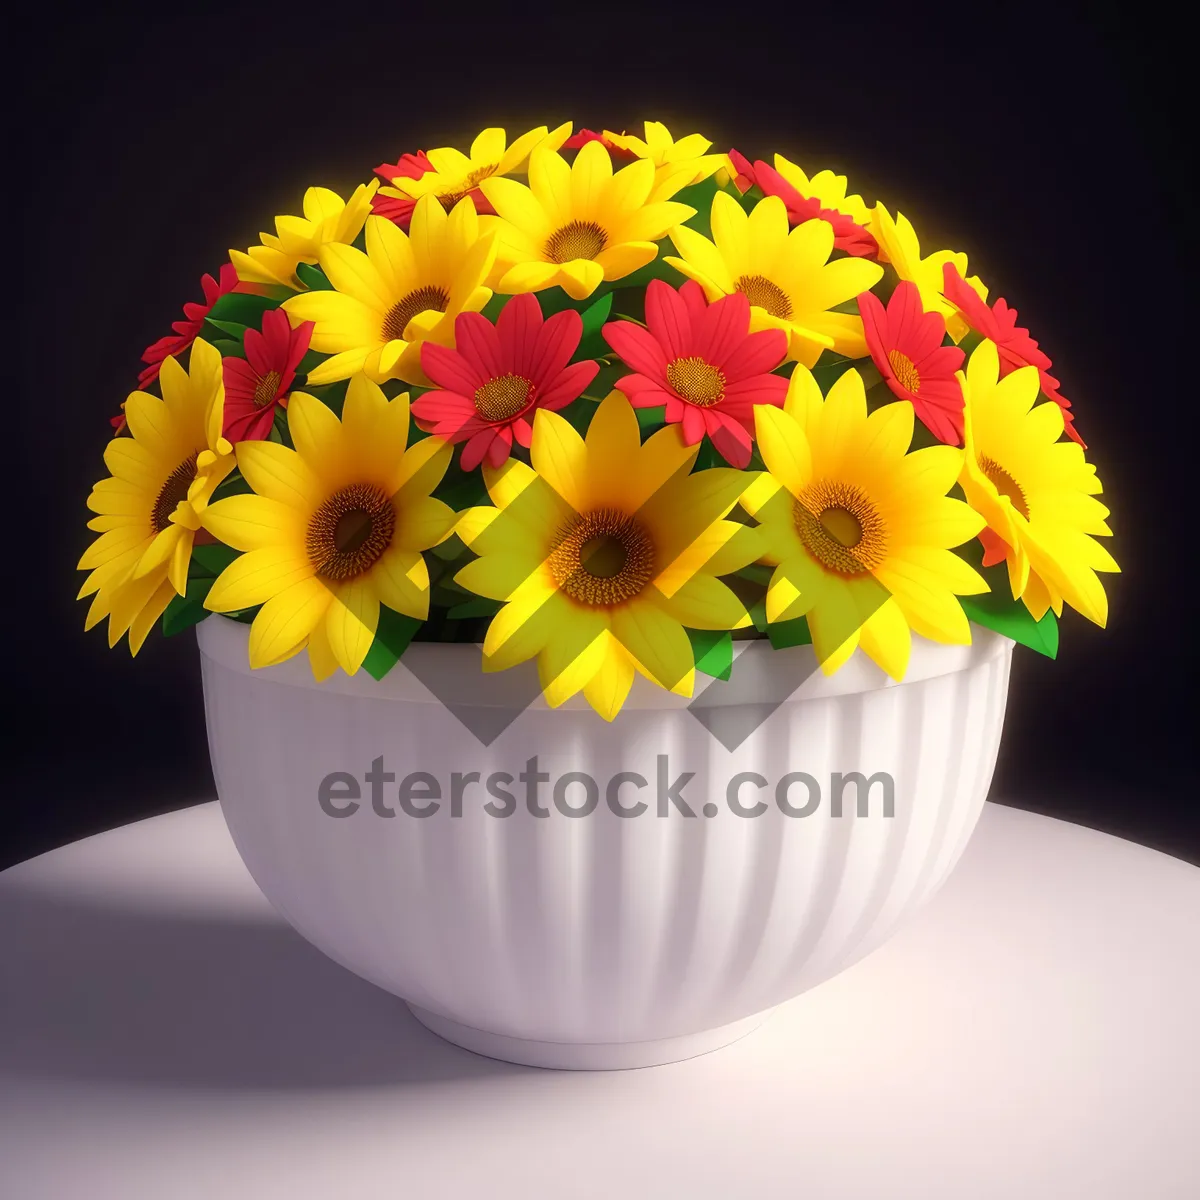 Picture of Bright Blooming Sunflower Bouquet in Garden